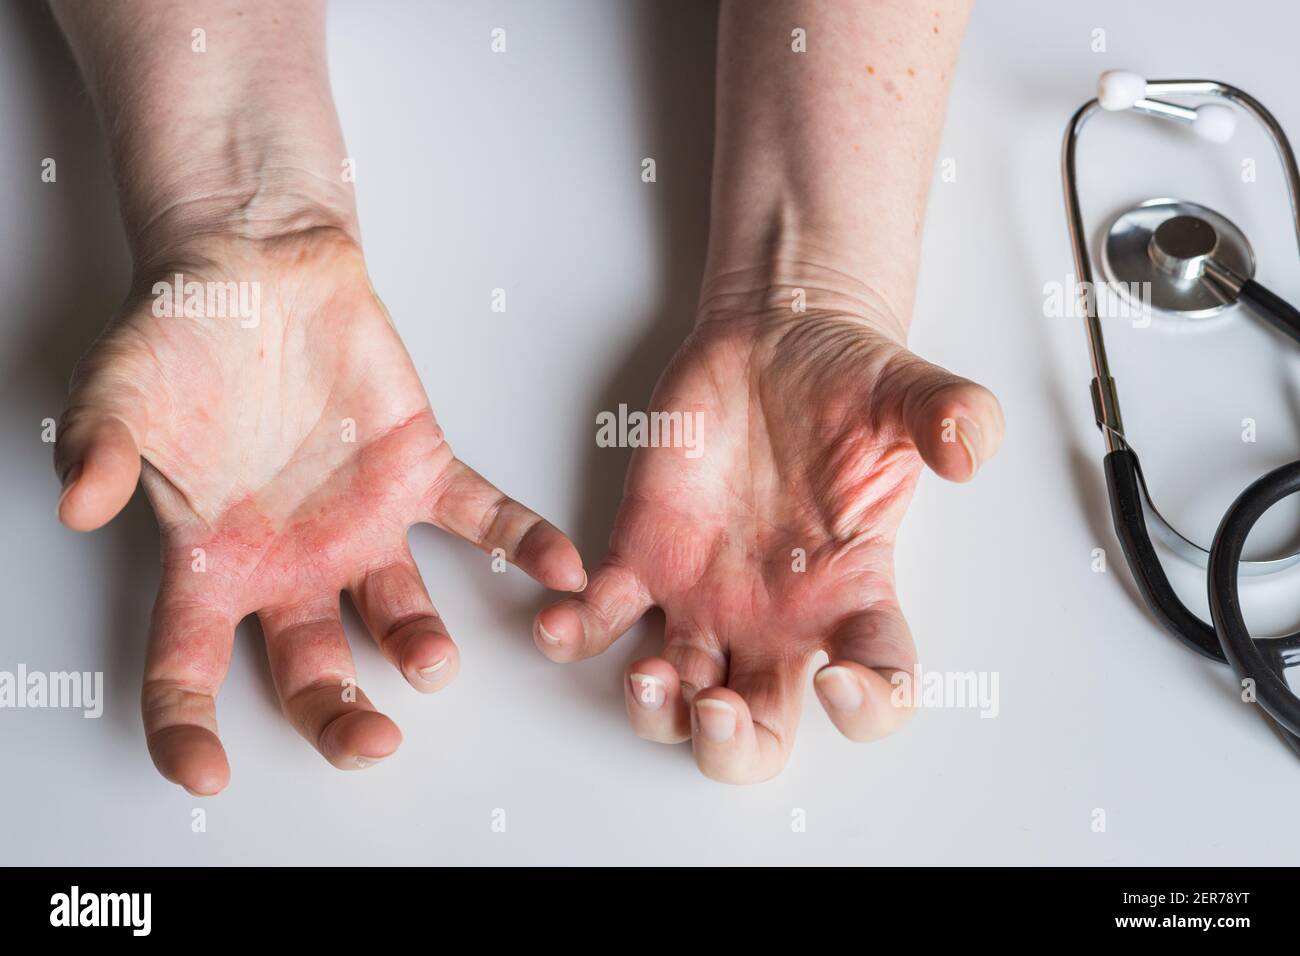 Red Itchy Hands With Blisters Atopic Dermatitis A Visit To A